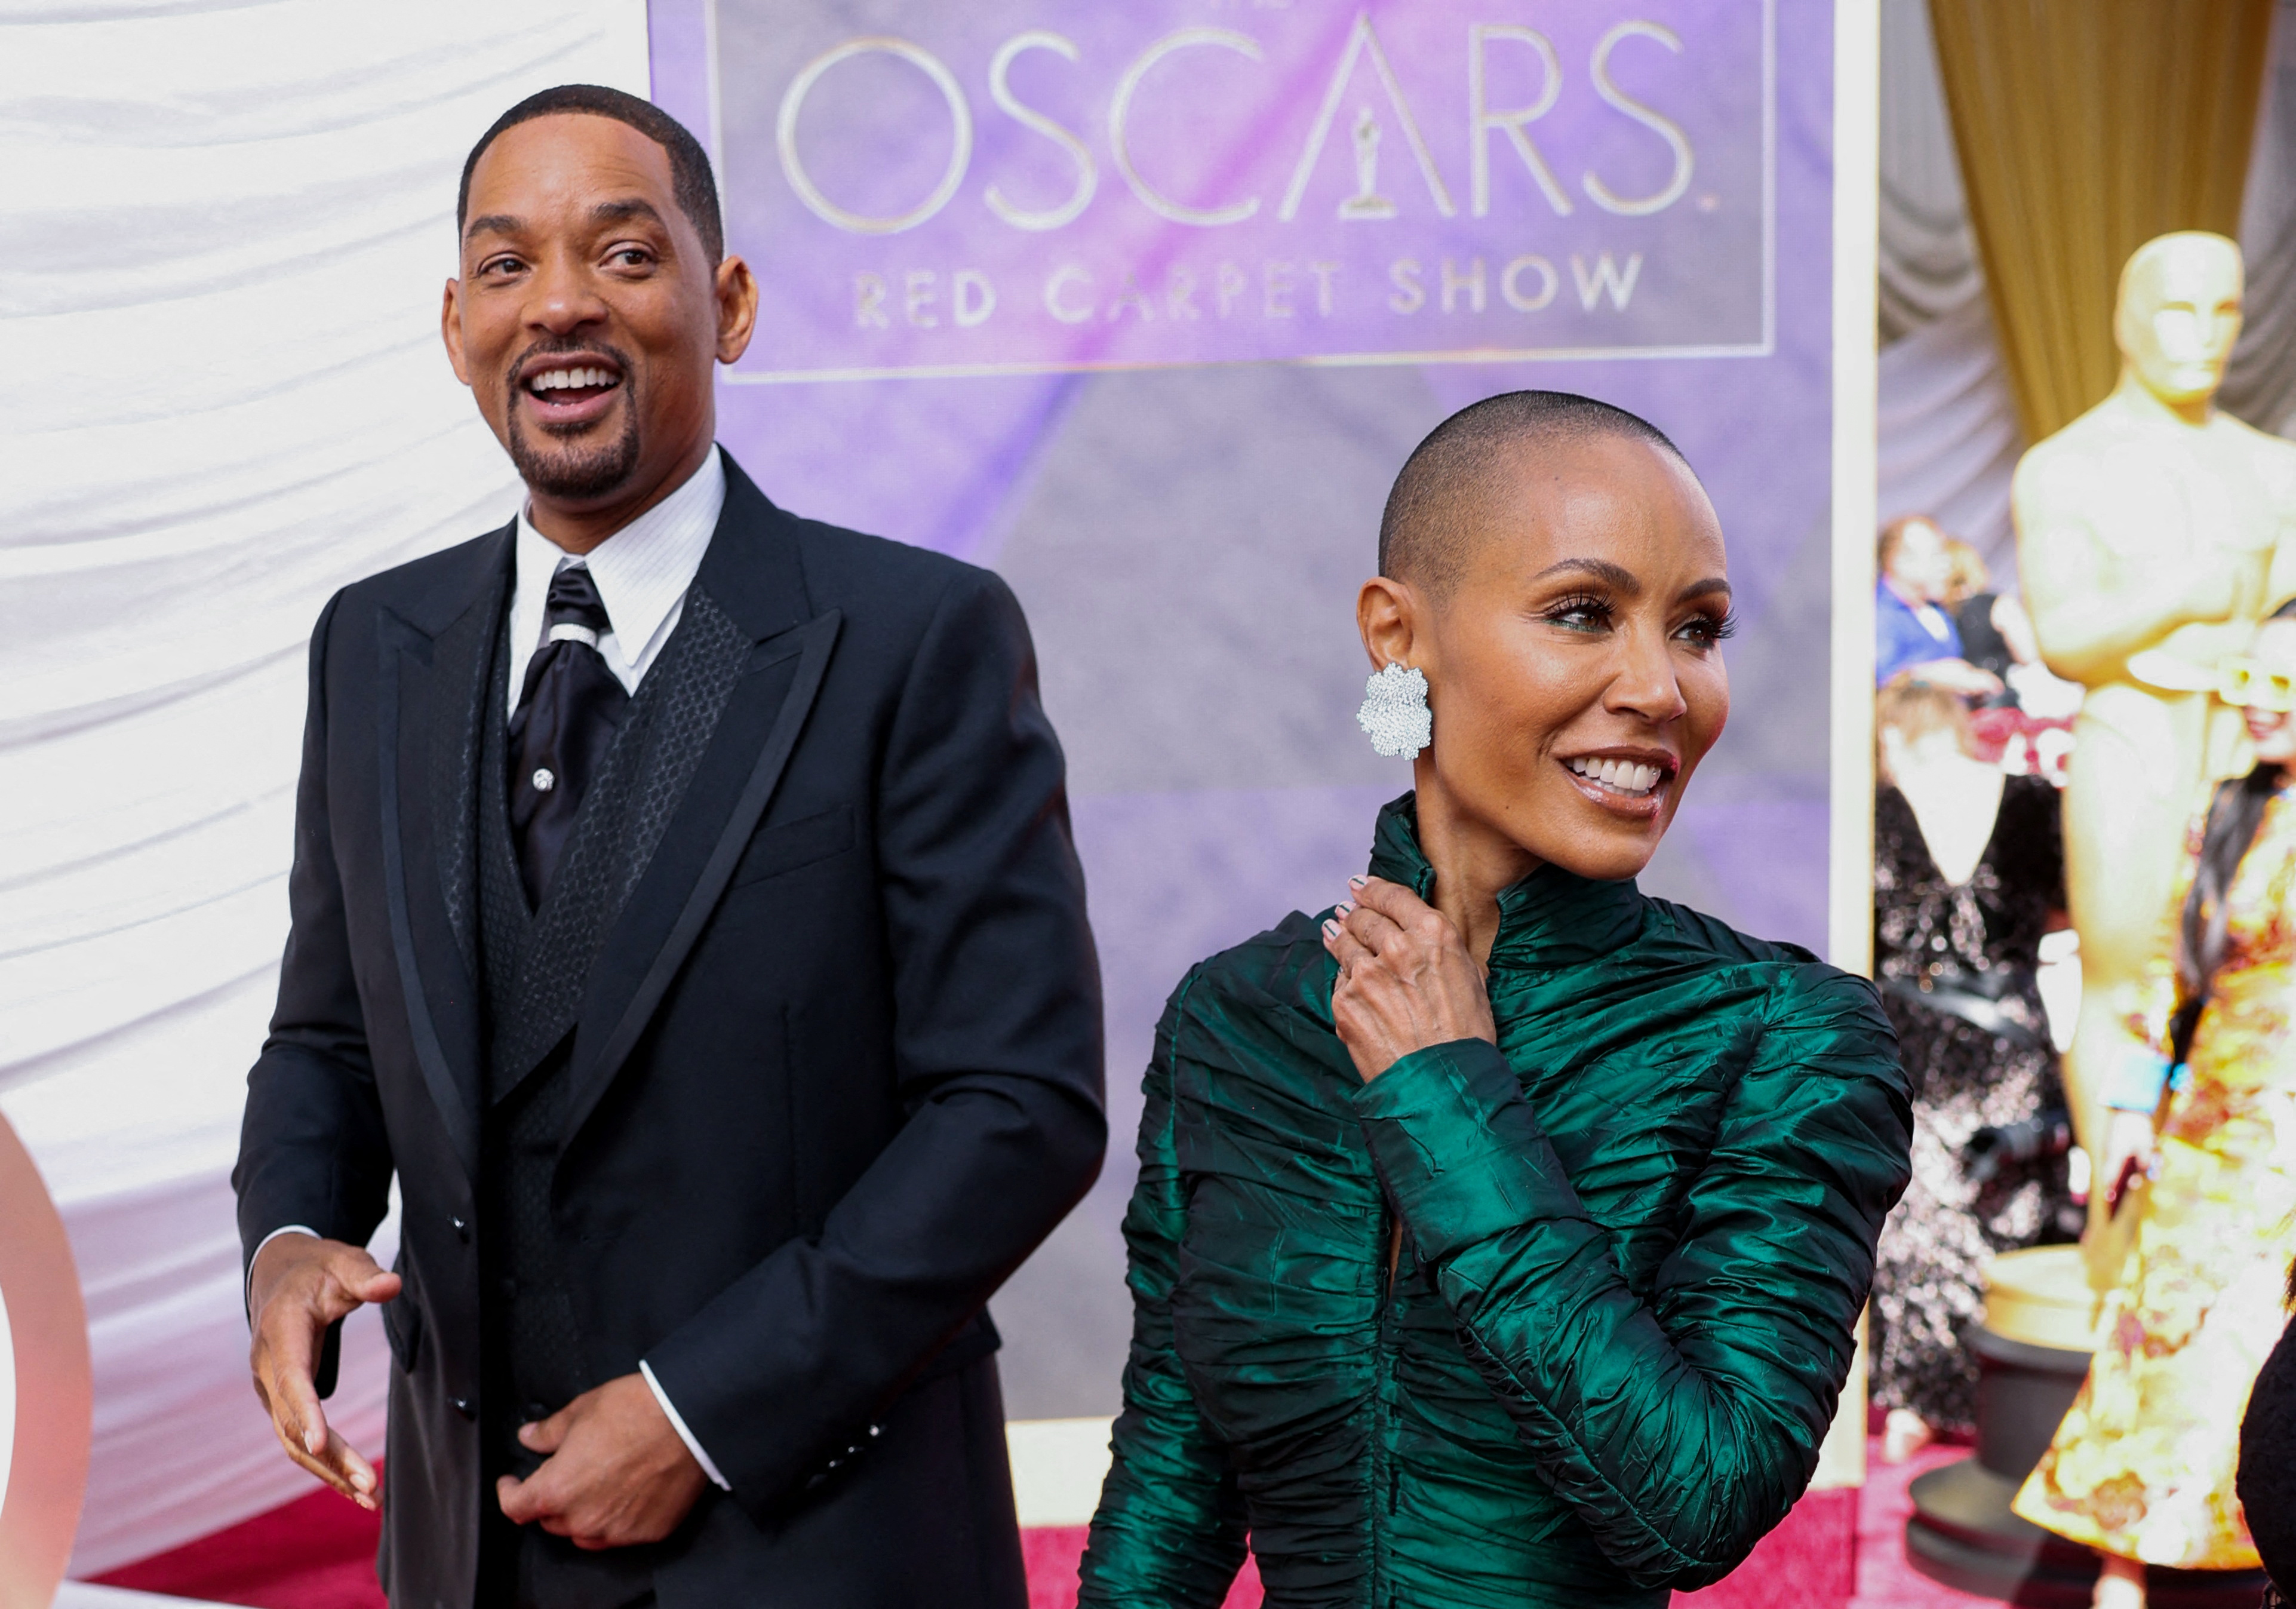 Will Smith and Jada Pinkett Smith pose on the red carpet during the Oscars arrivals at the 94th Academy Awards in Hollywood, Los Angeles, California, U.S.